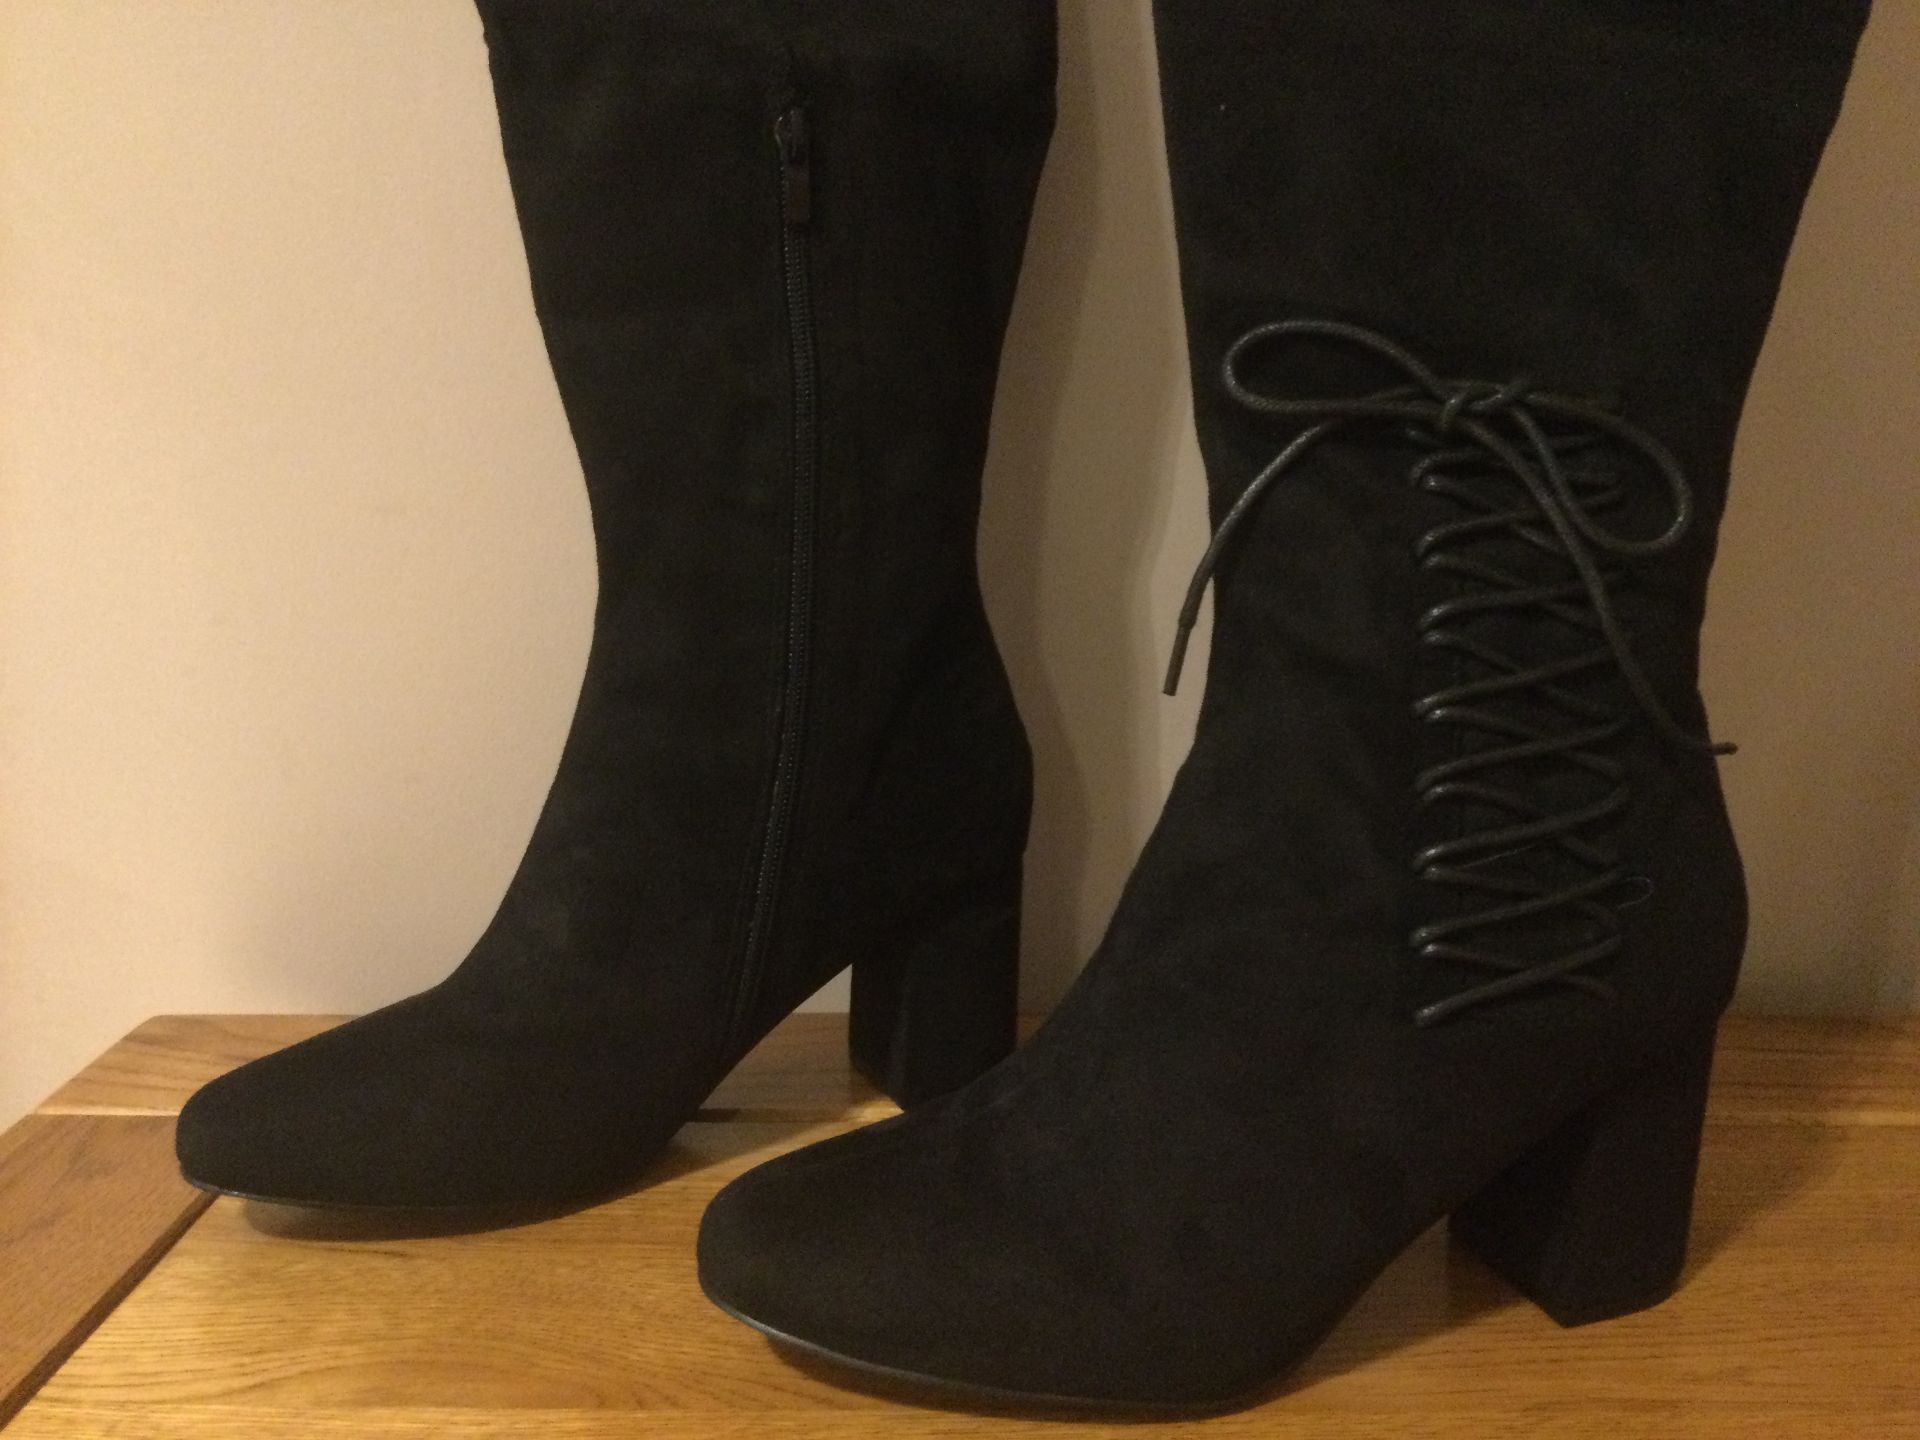 Dolcis “Emma” Long Boots, Block Heel, Size 3, Black - New RRP £55.00 - Image 3 of 7